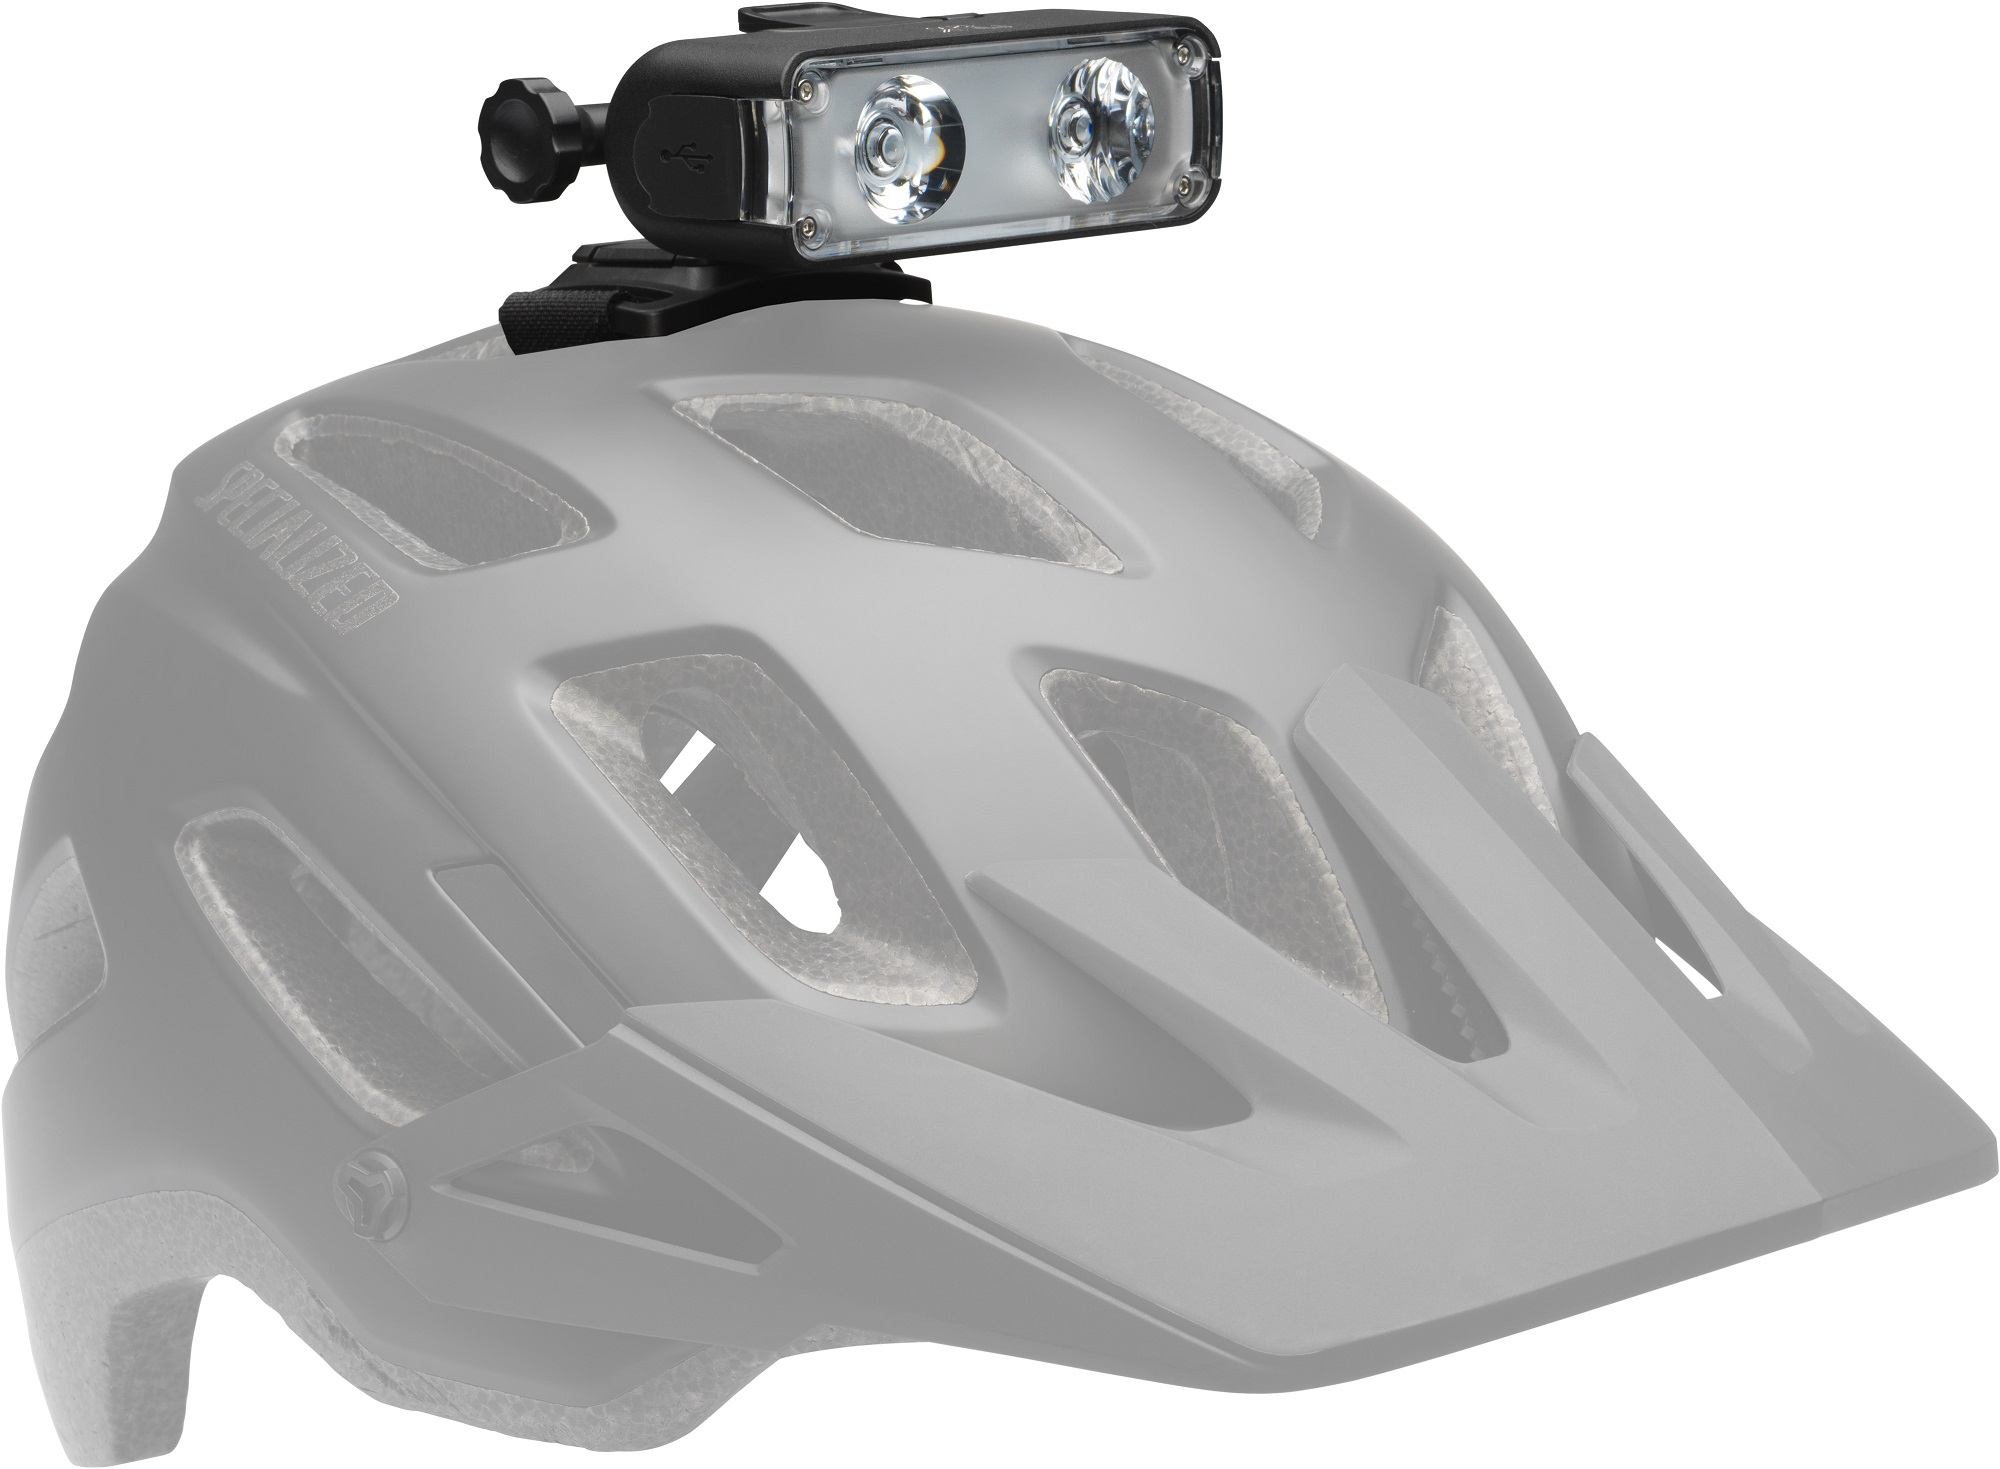 Specialized Flux 1200 headlight uses dual beams for even better illumination